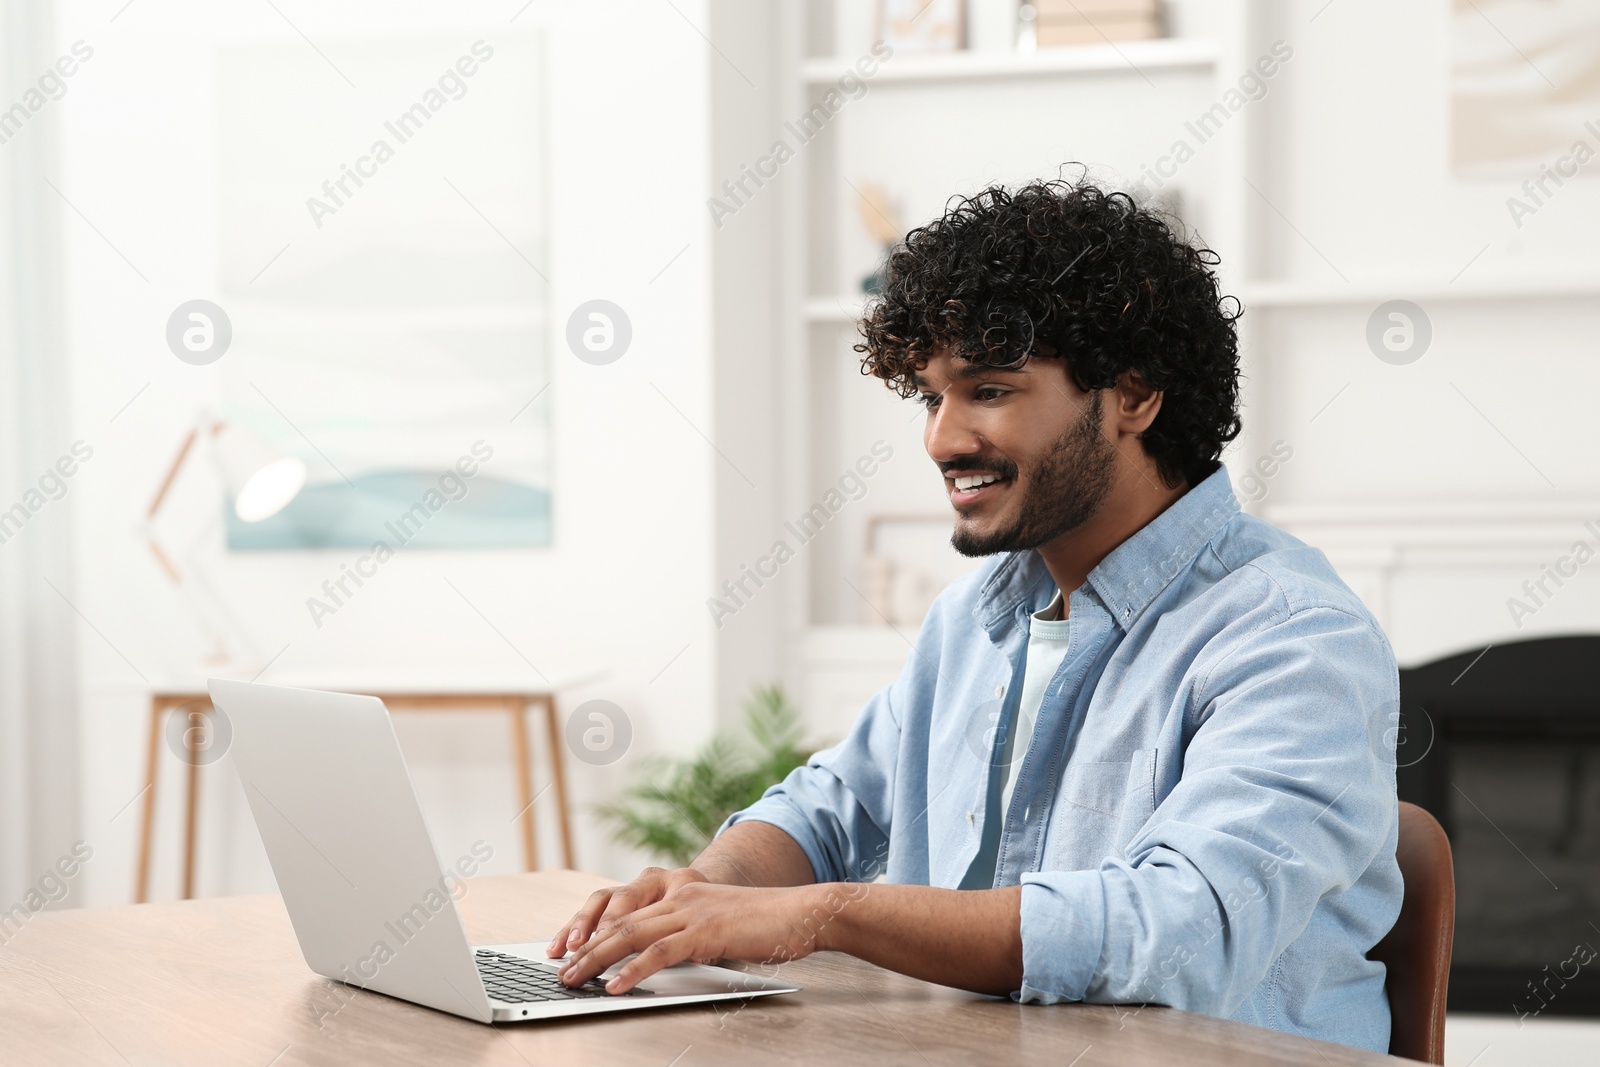 Photo of Handsome smiling man using laptop in room, space for text